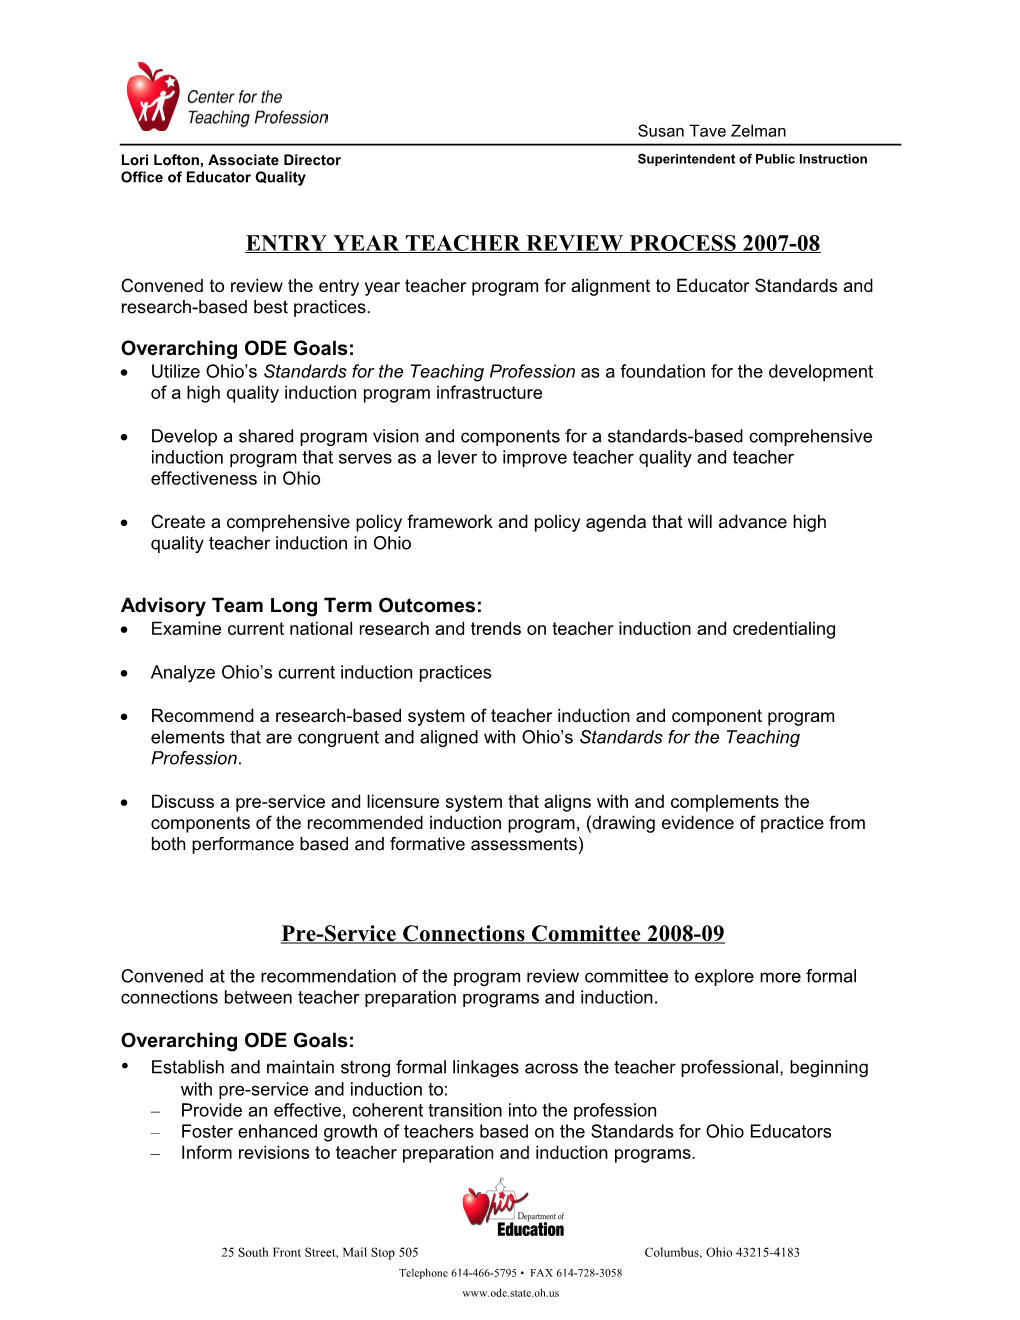 Entry Year Teacher Review Process 2007-08